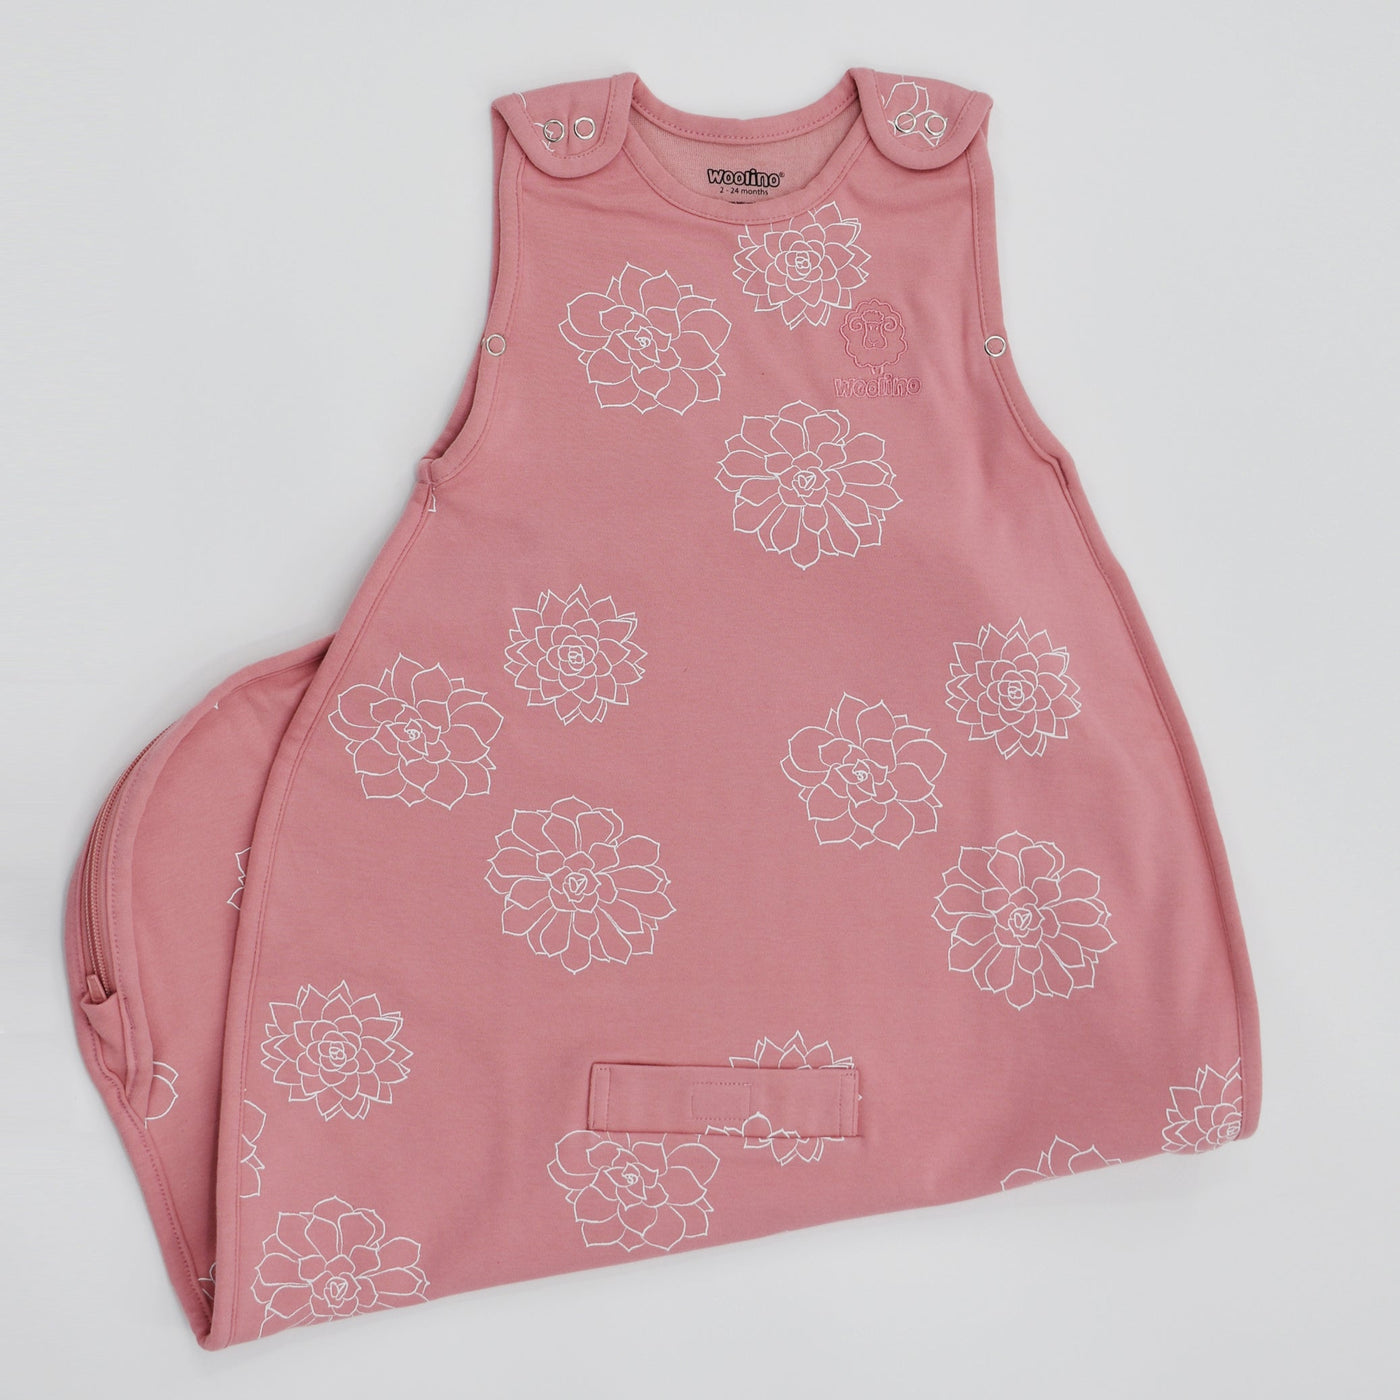 Woolino Baby Clothing, Babies 0-24 Months